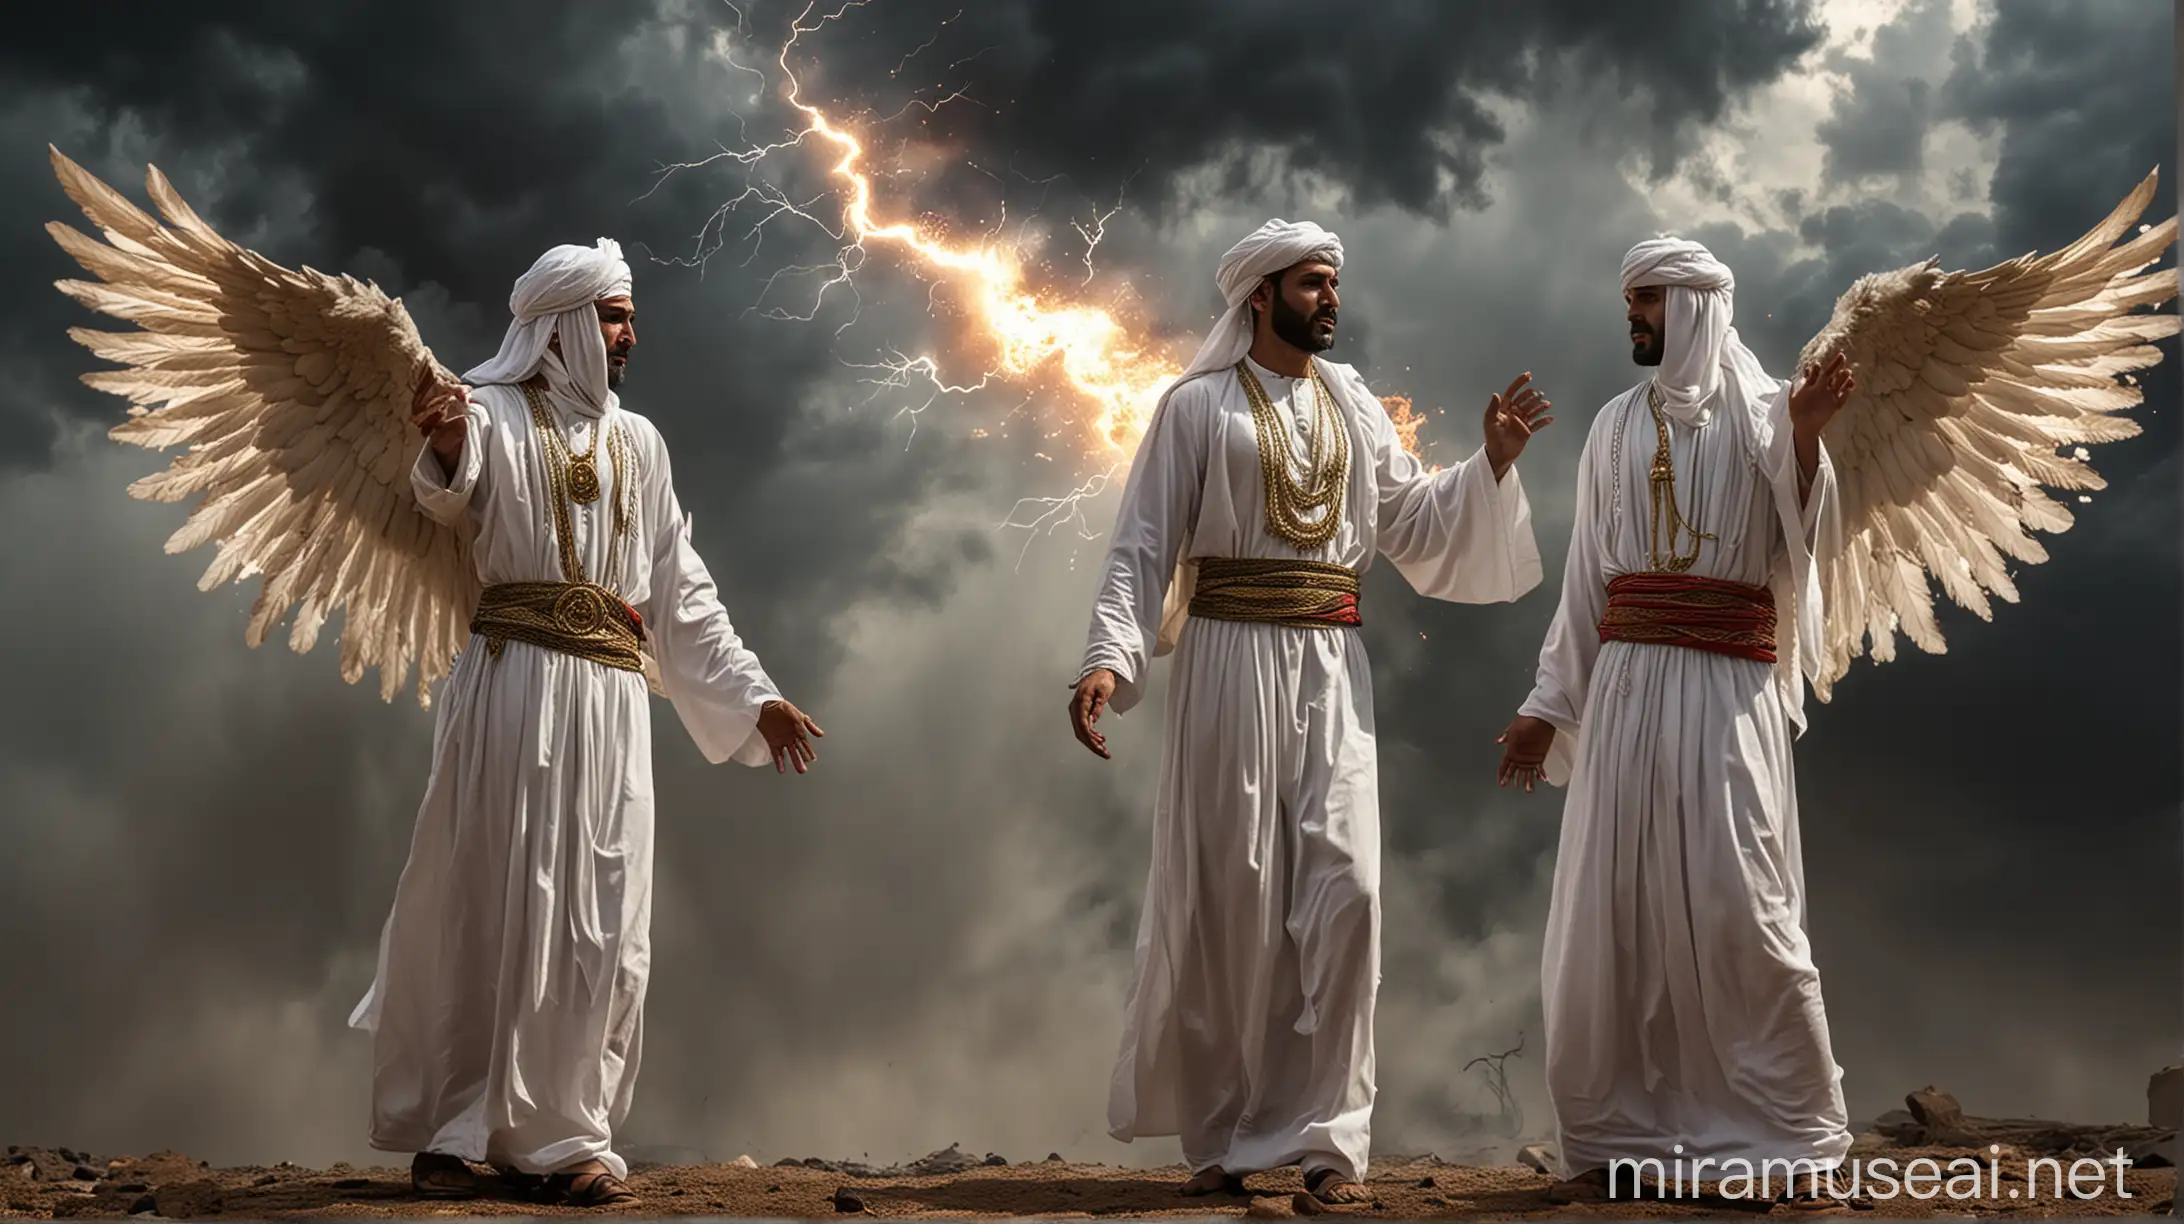 Mystical Waja Warriors Confronting Darkness in Fiery Skies